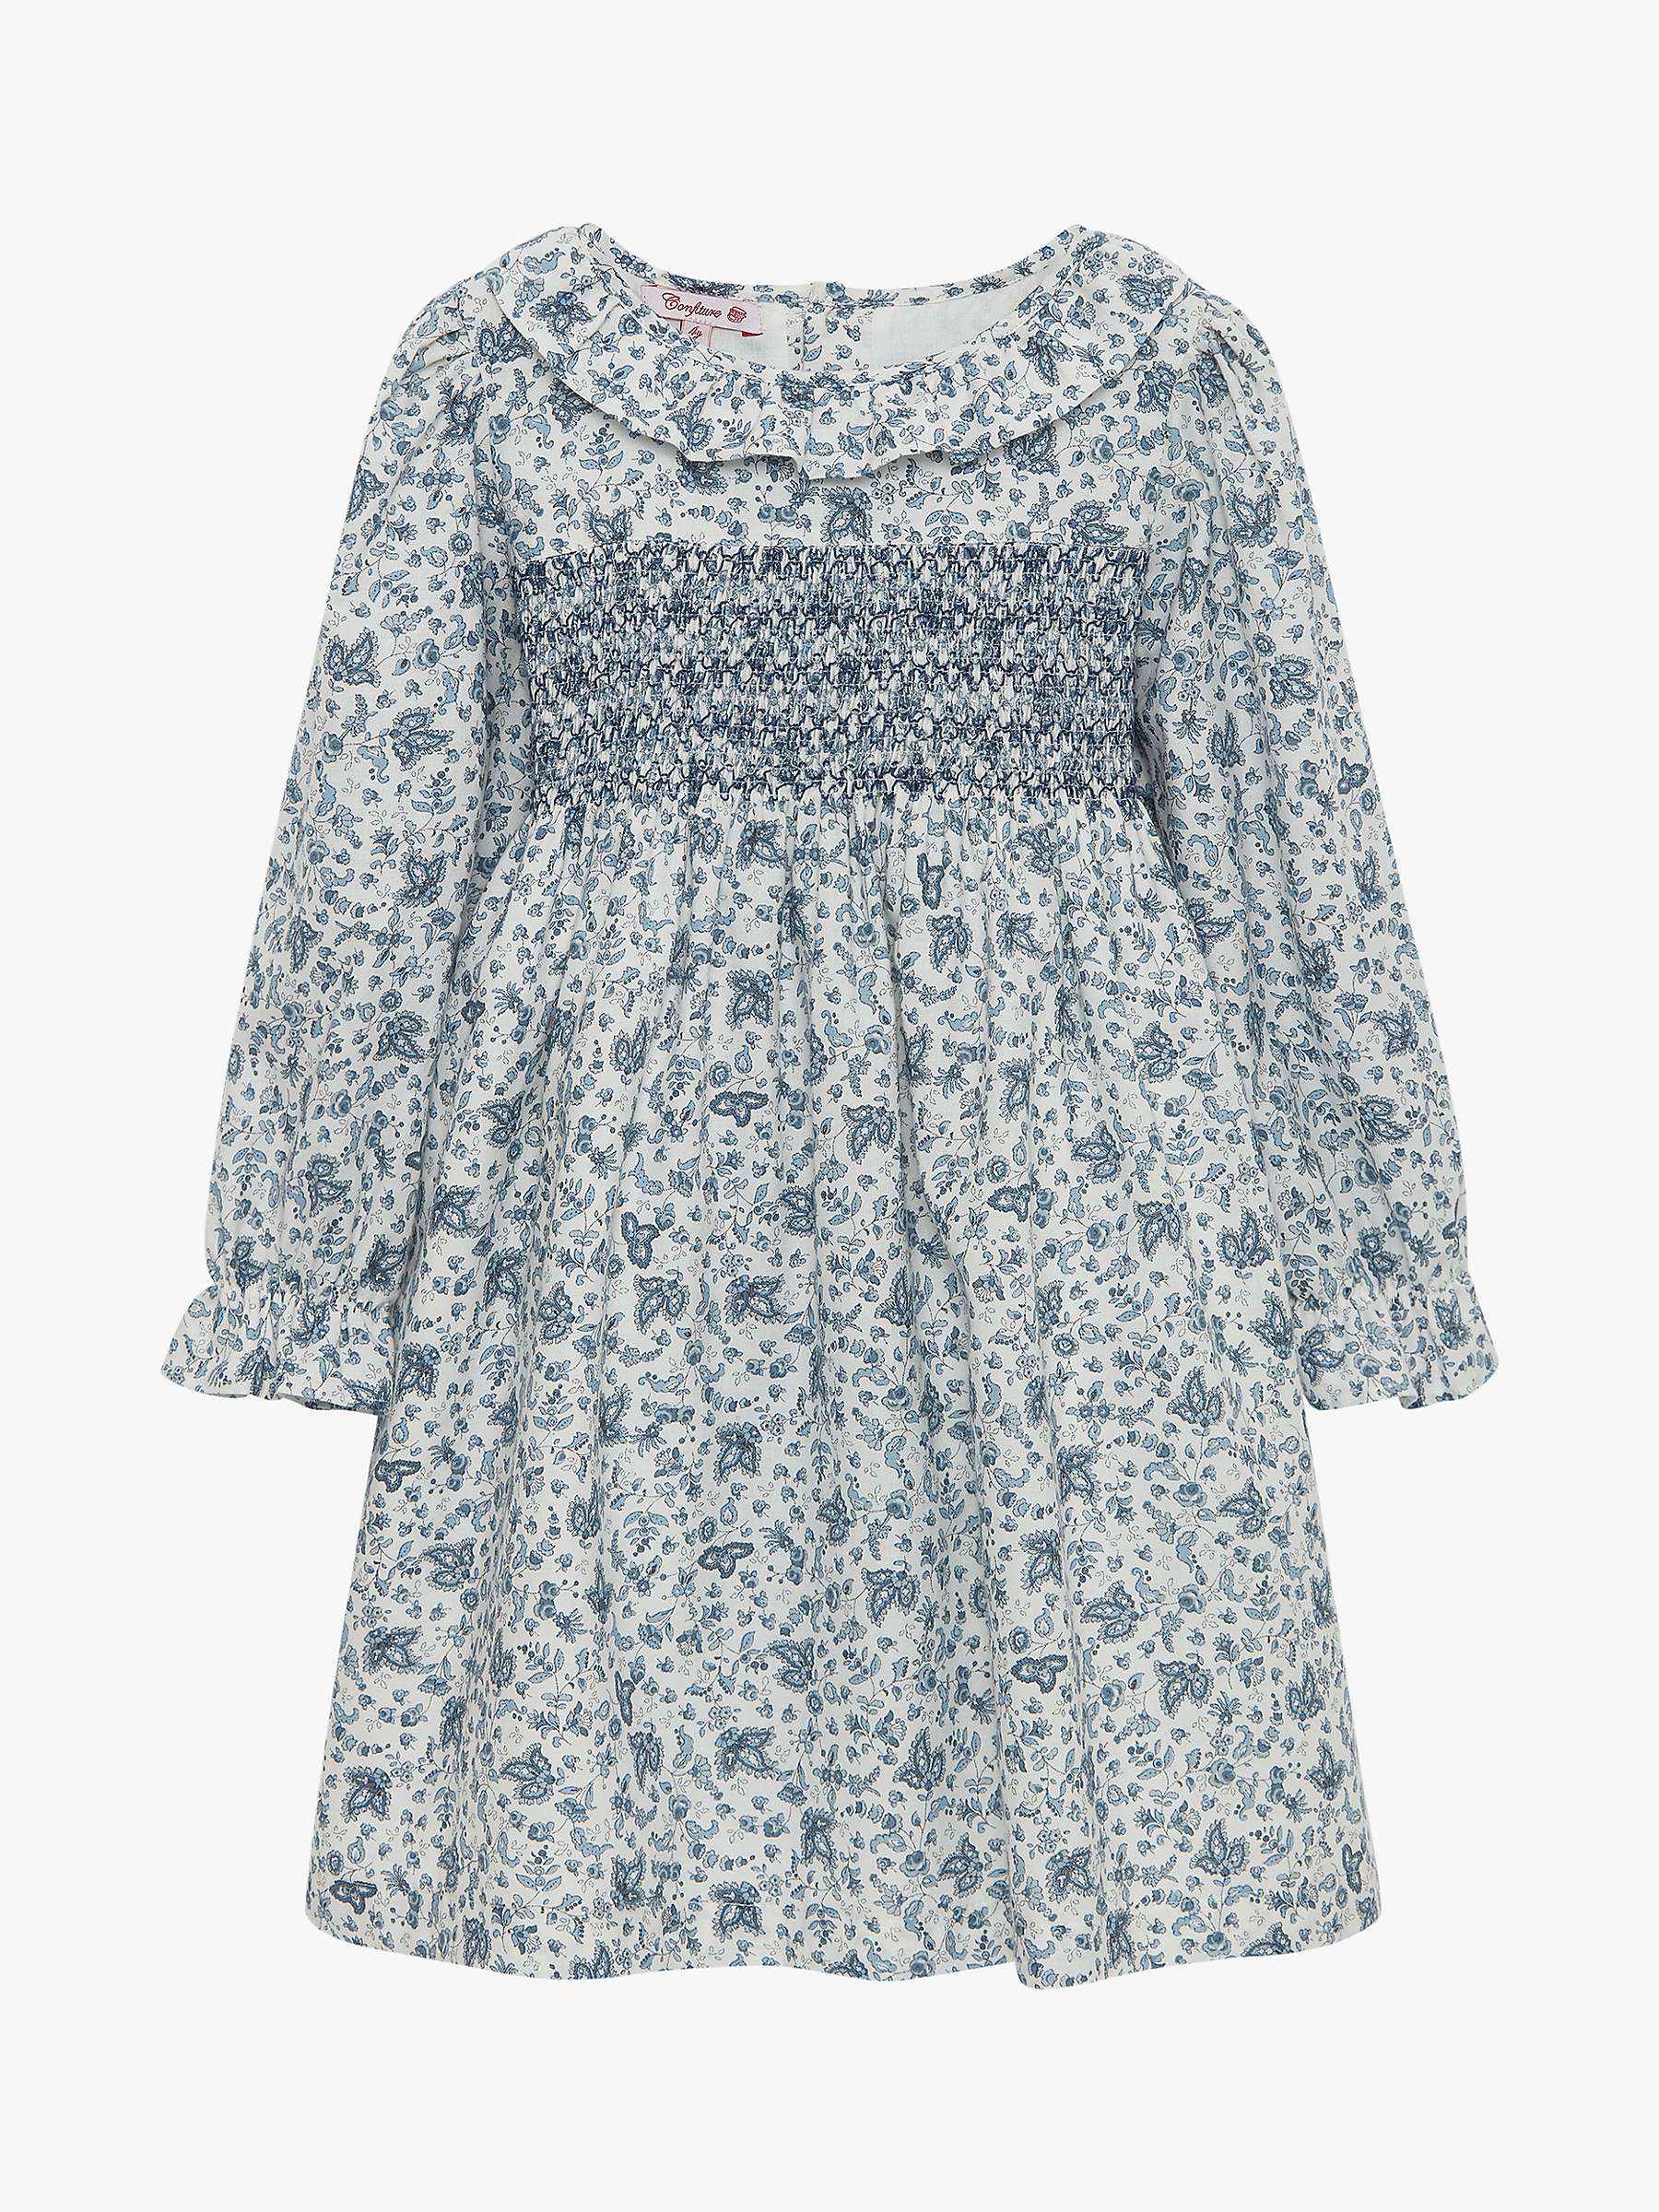 Buy Trotters Confiture Kids' Penny Paisley Smocked Dress, Off White/Blue Online at johnlewis.com